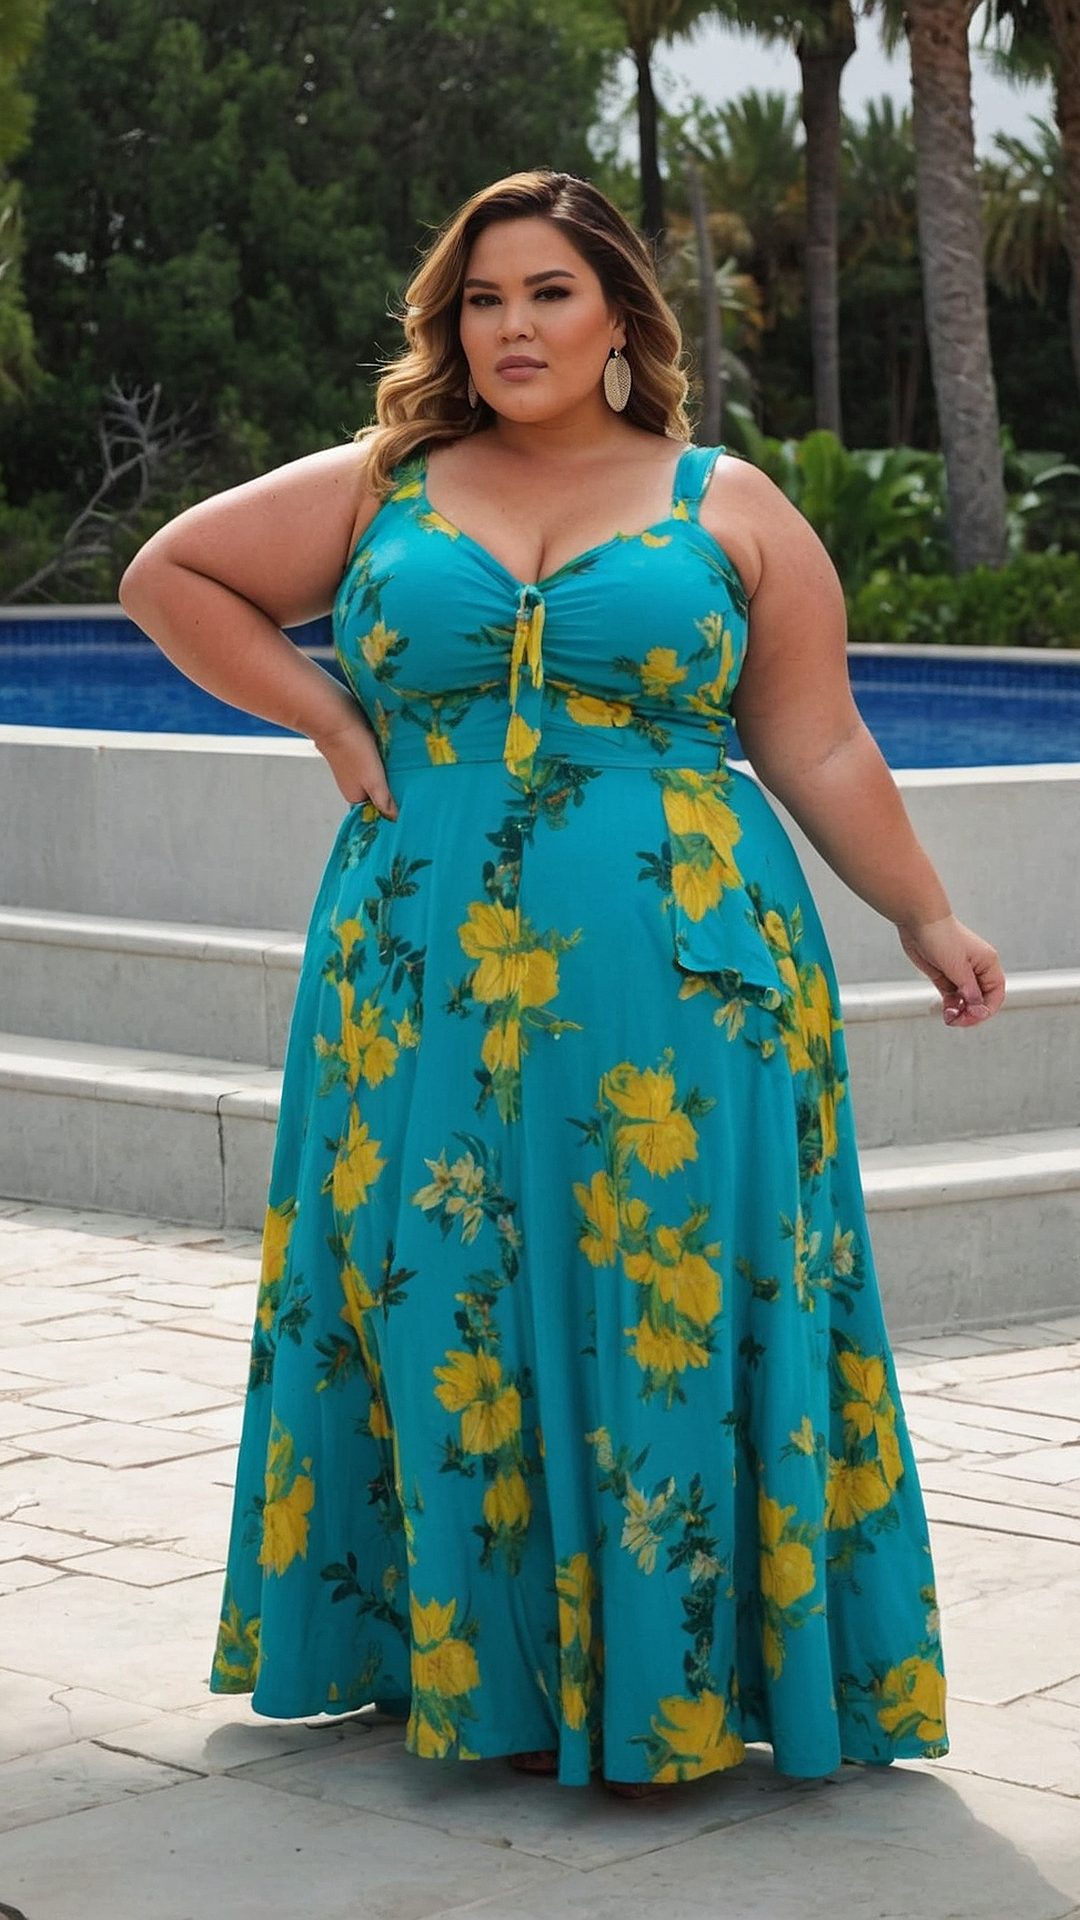 Plus Size Summer Outfits: From Beach to Brunch